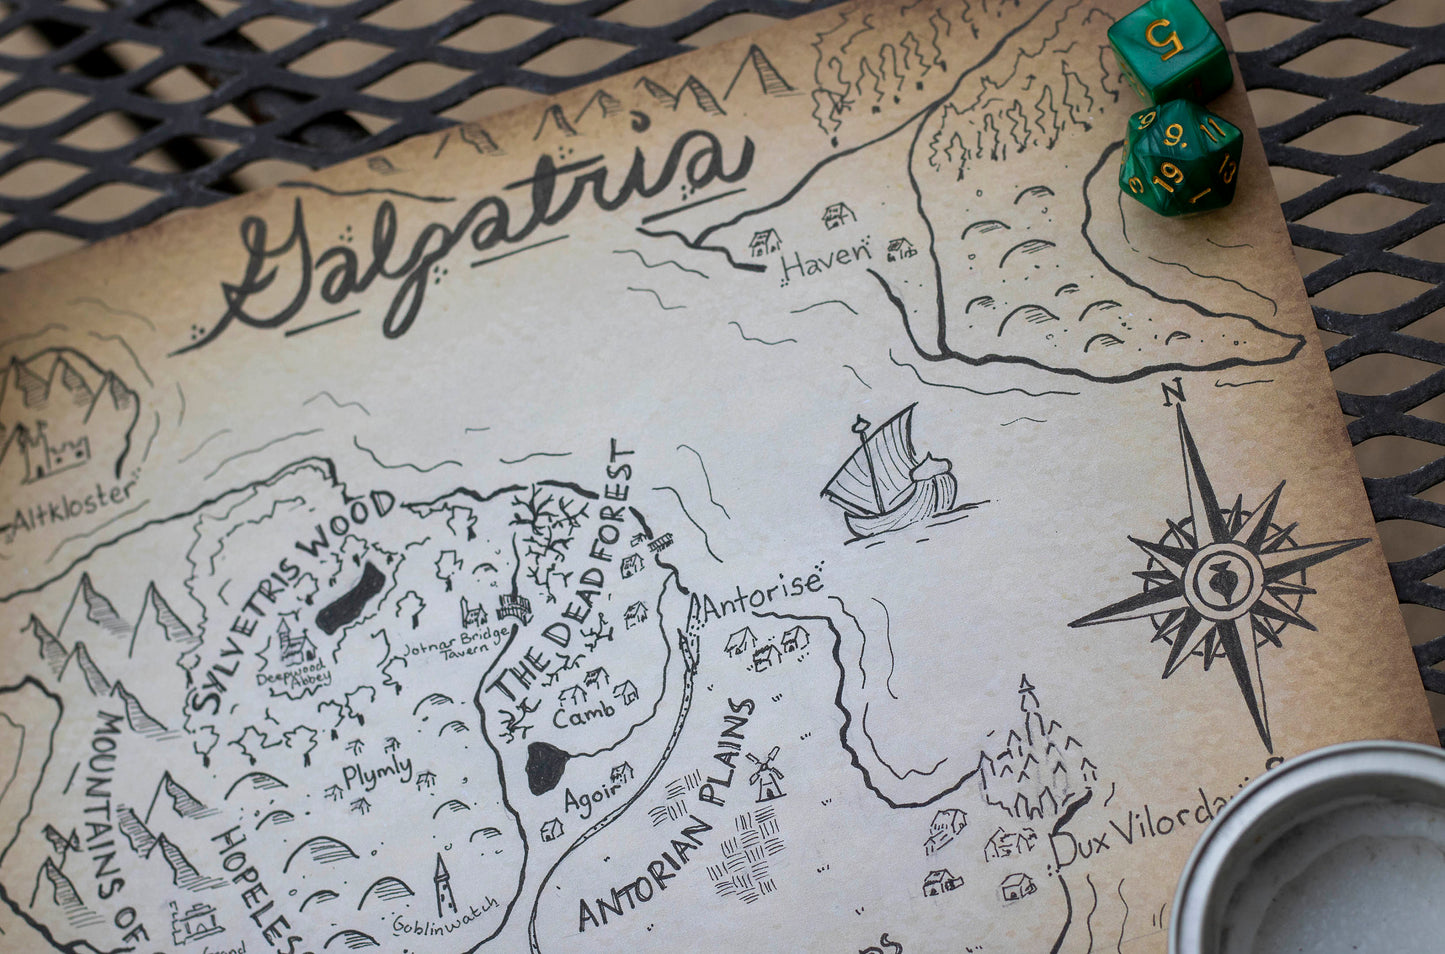 Continent Custom Fantasy Map - 8.5x11 inch Original Hand Drawn Fantasy Map for Dungeons & Dragons | Pathfinder | Tabletop RPG